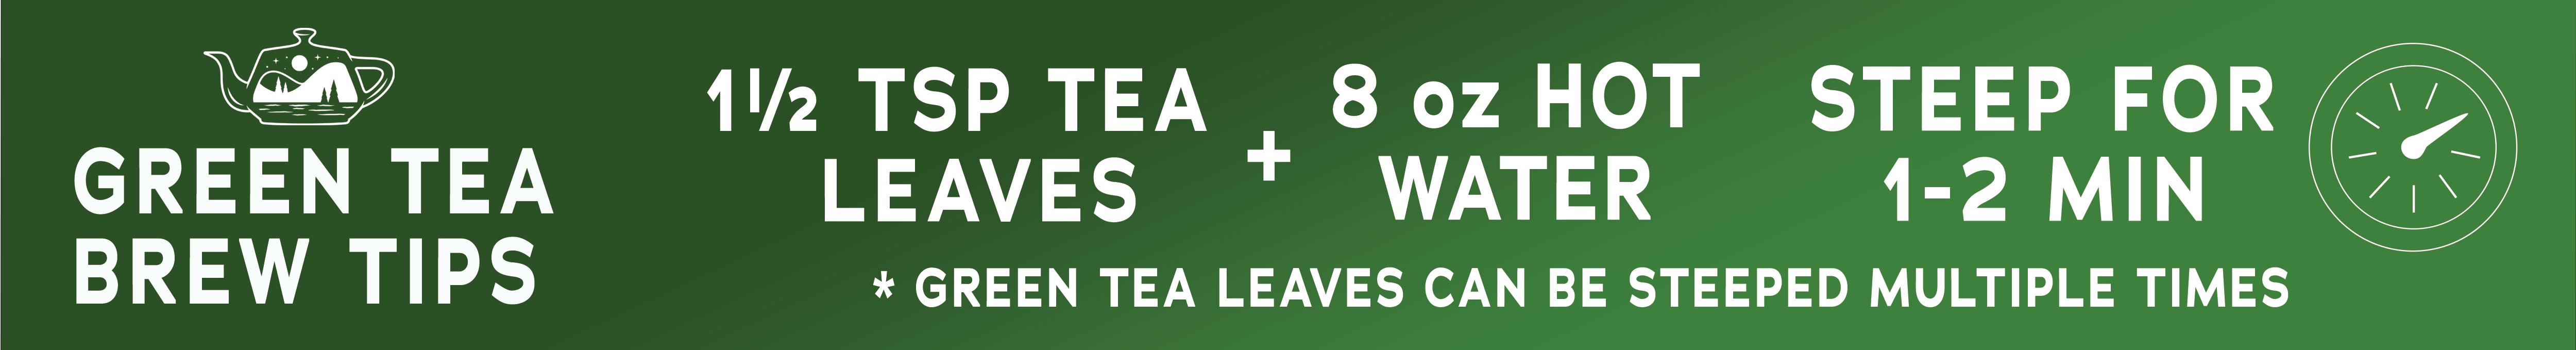 To Brew Green Tea, steep 1 1/2 teaspoons of tea leaves in 8 oz of hot water for 1-2 minutes.